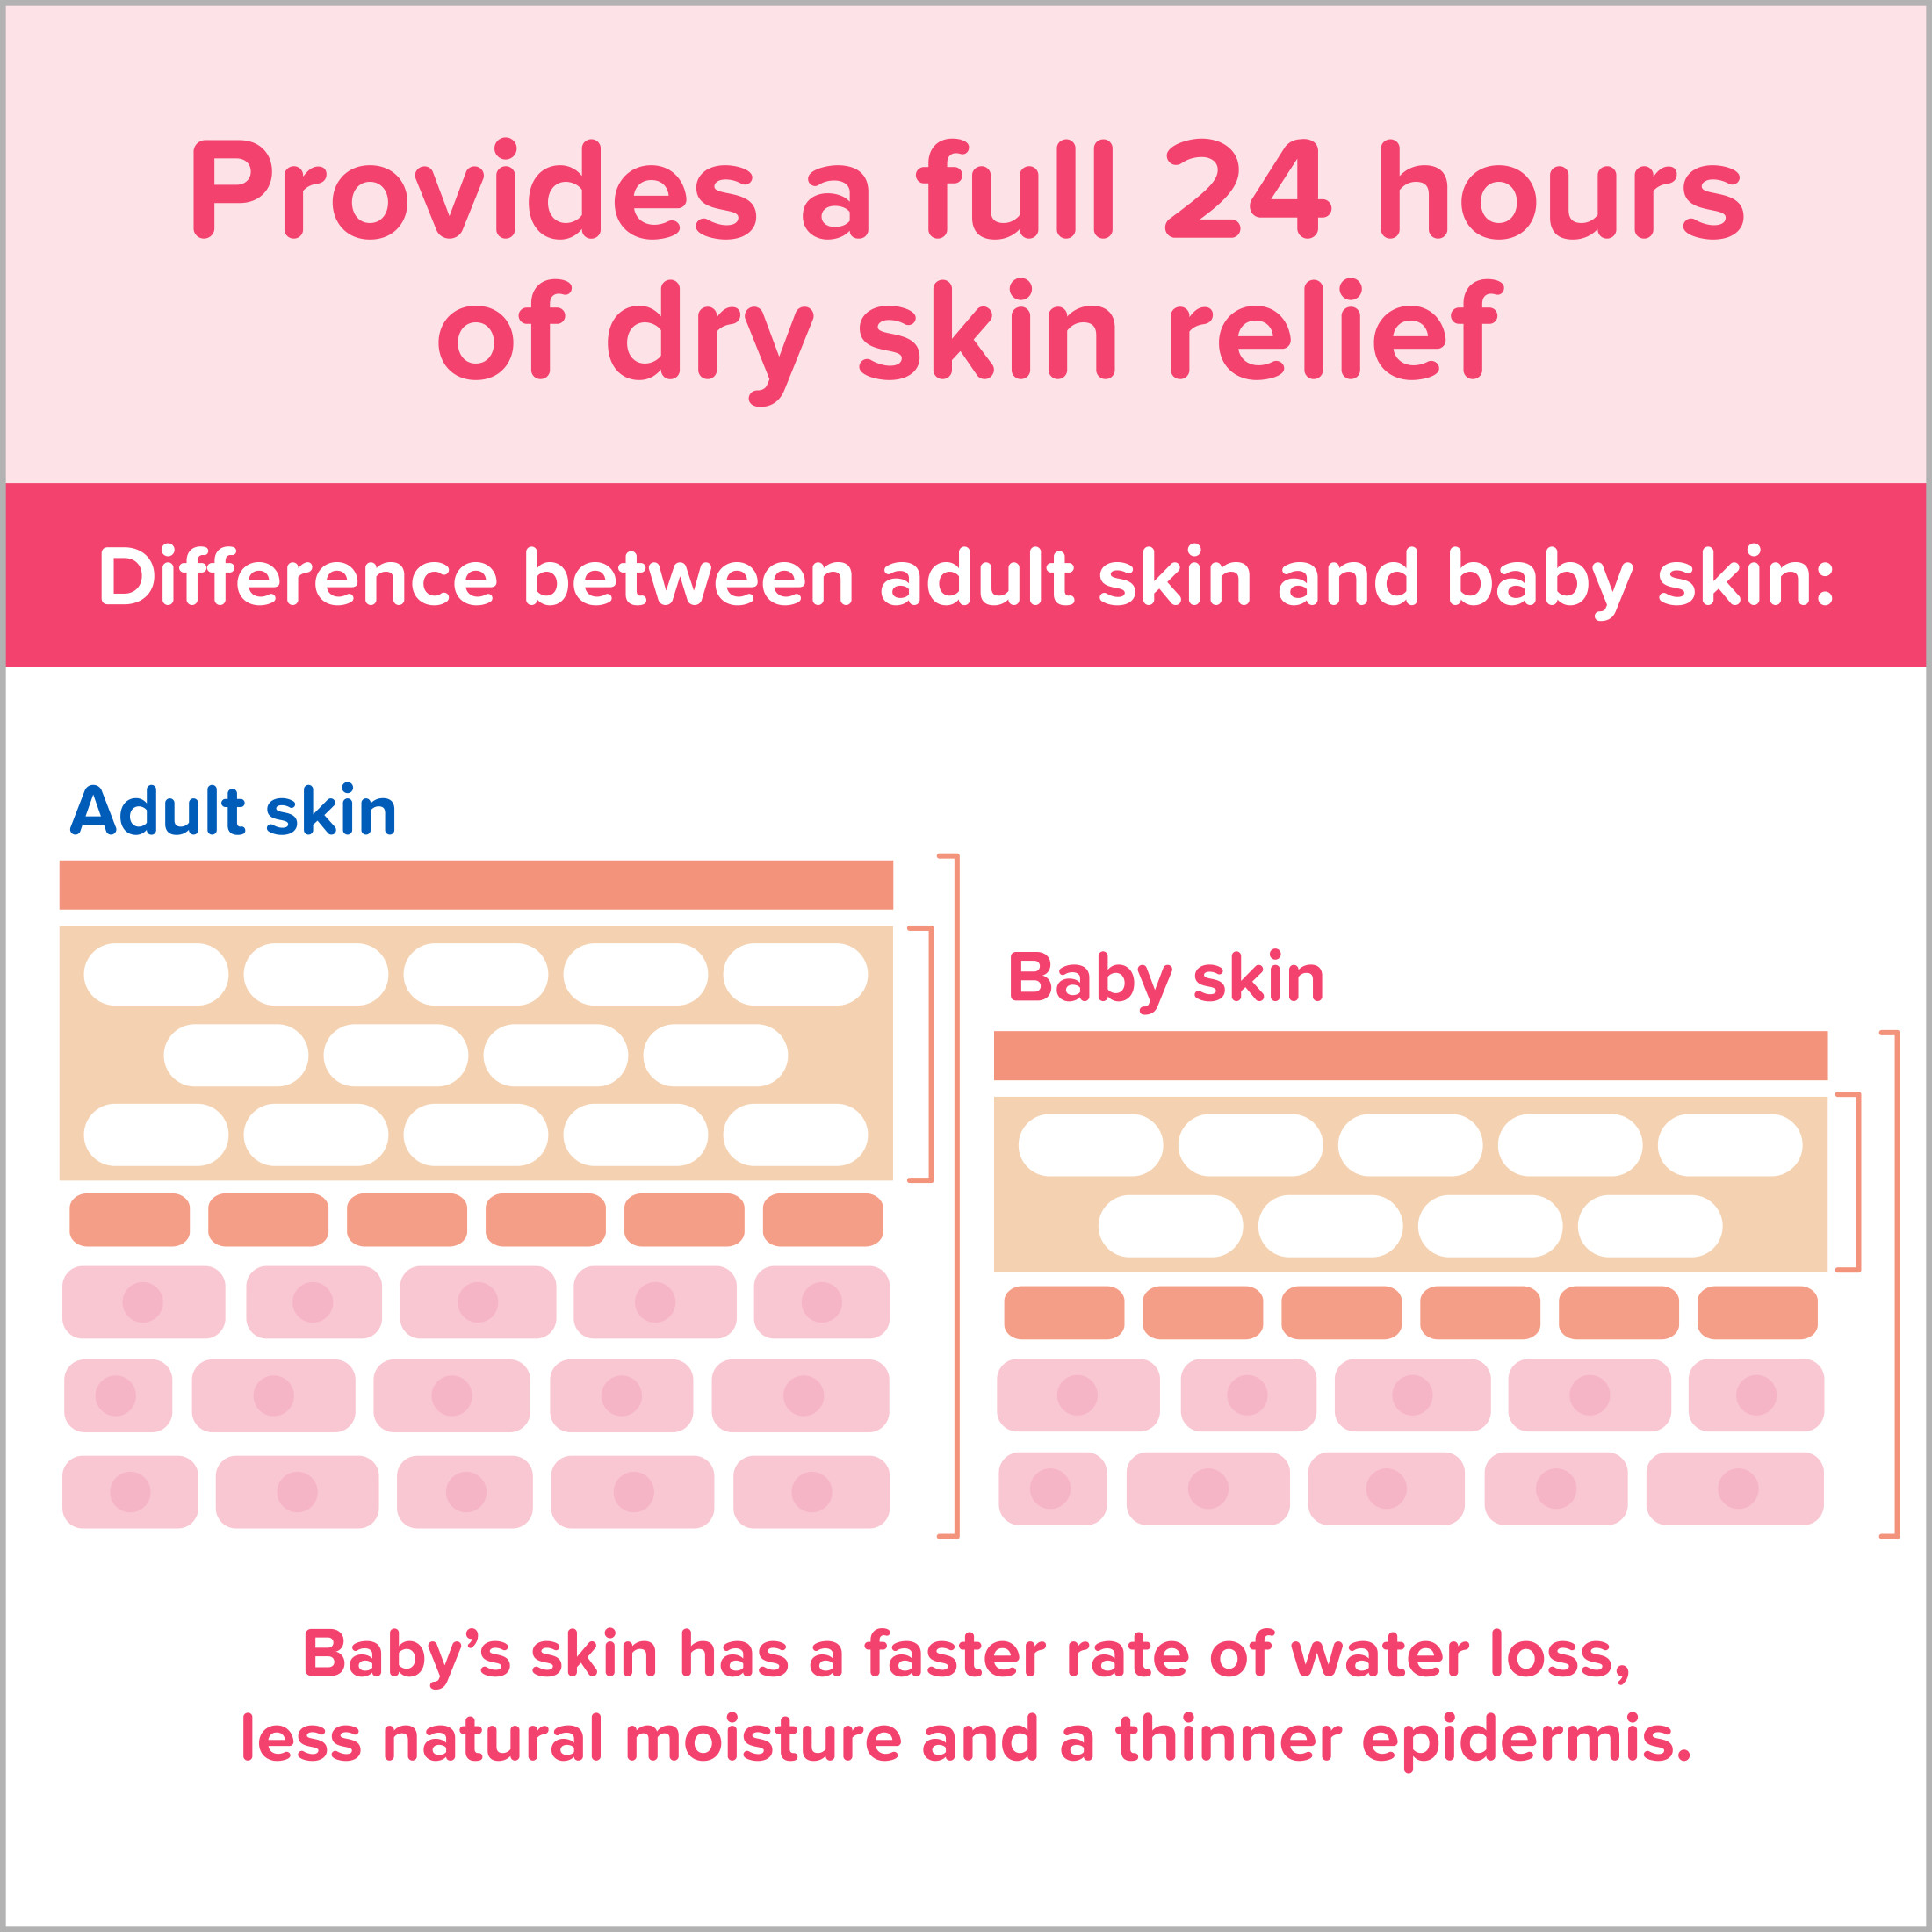 Johnson's Moisturizing Pink Baby Body Lotion with Coconut Oil, 27.1 oz - image 5 of 9